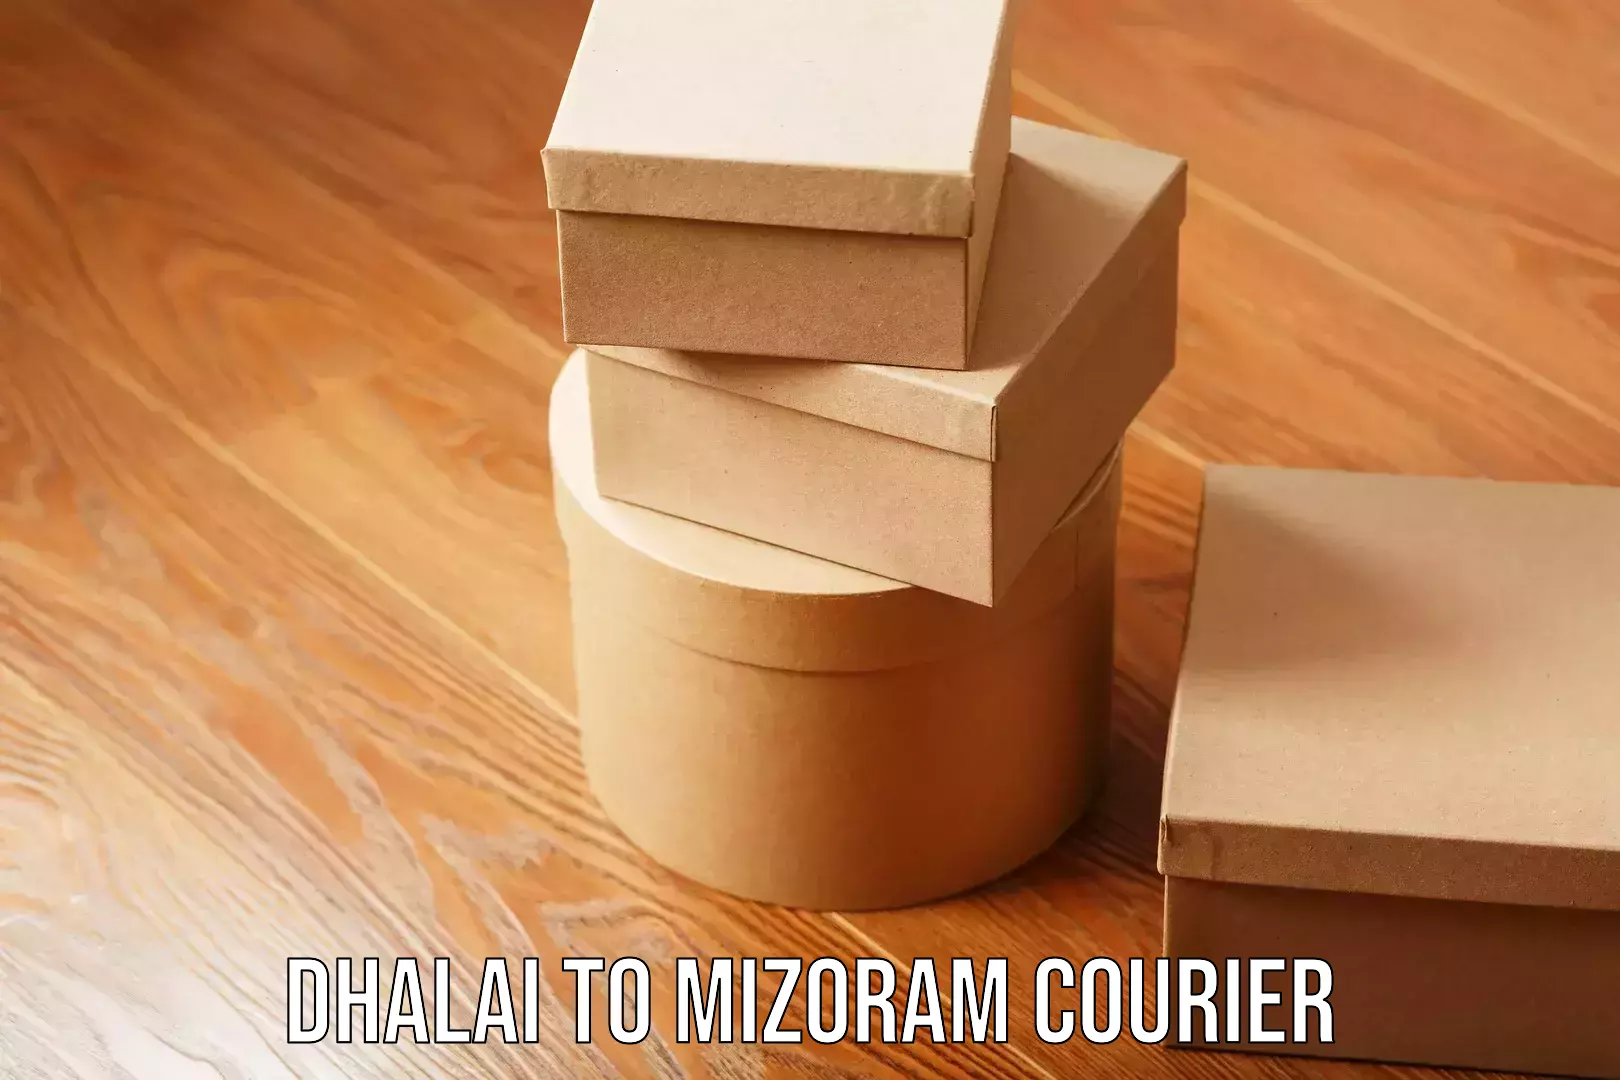 On-call courier service Dhalai to Mizoram